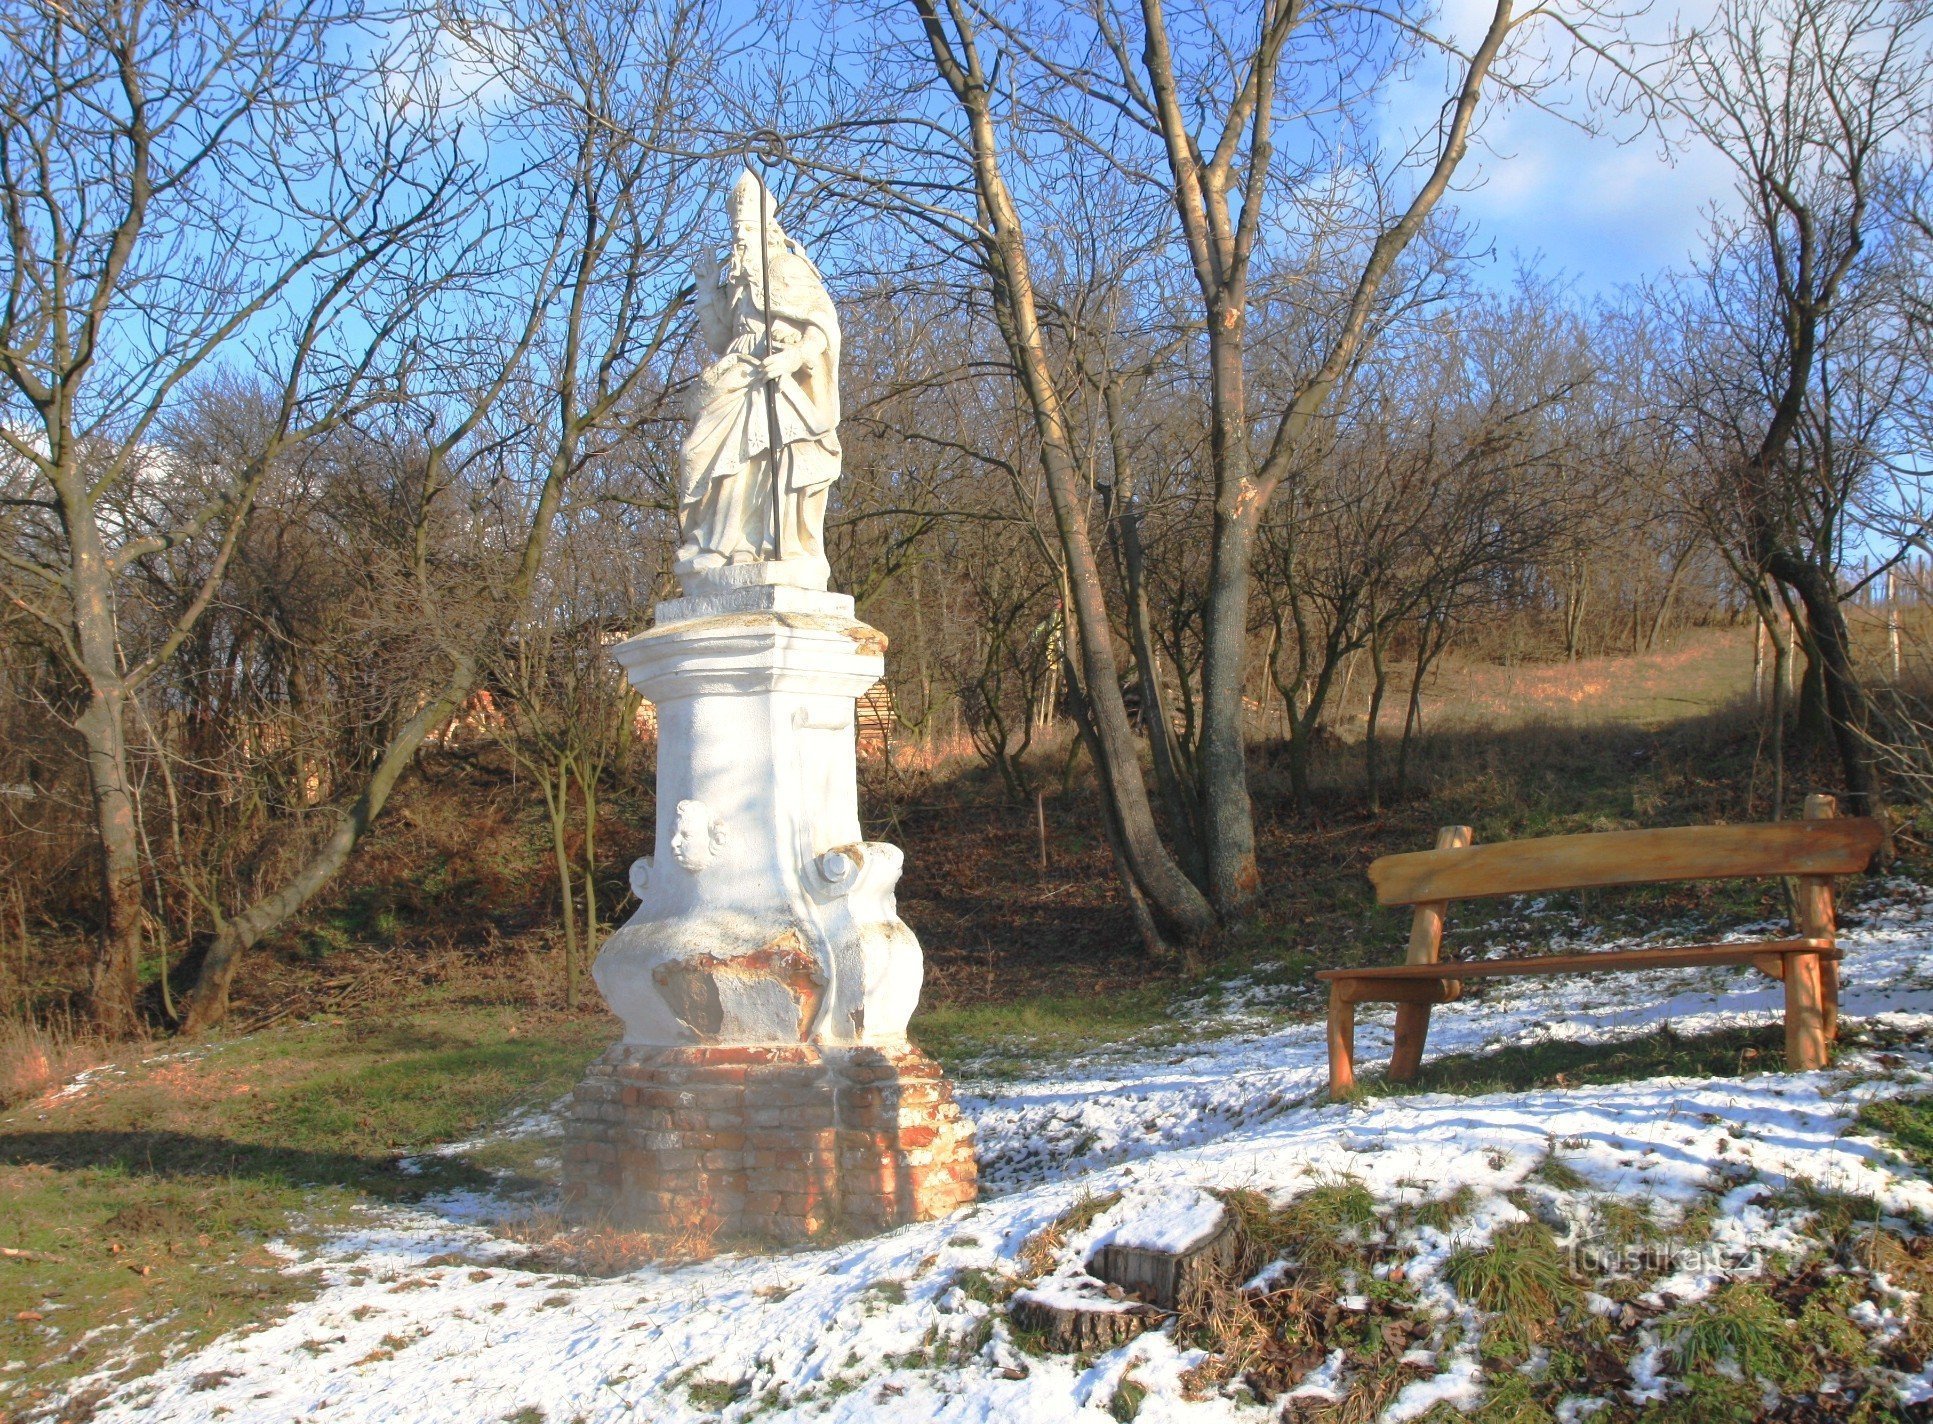 There is a view of the village from the statue